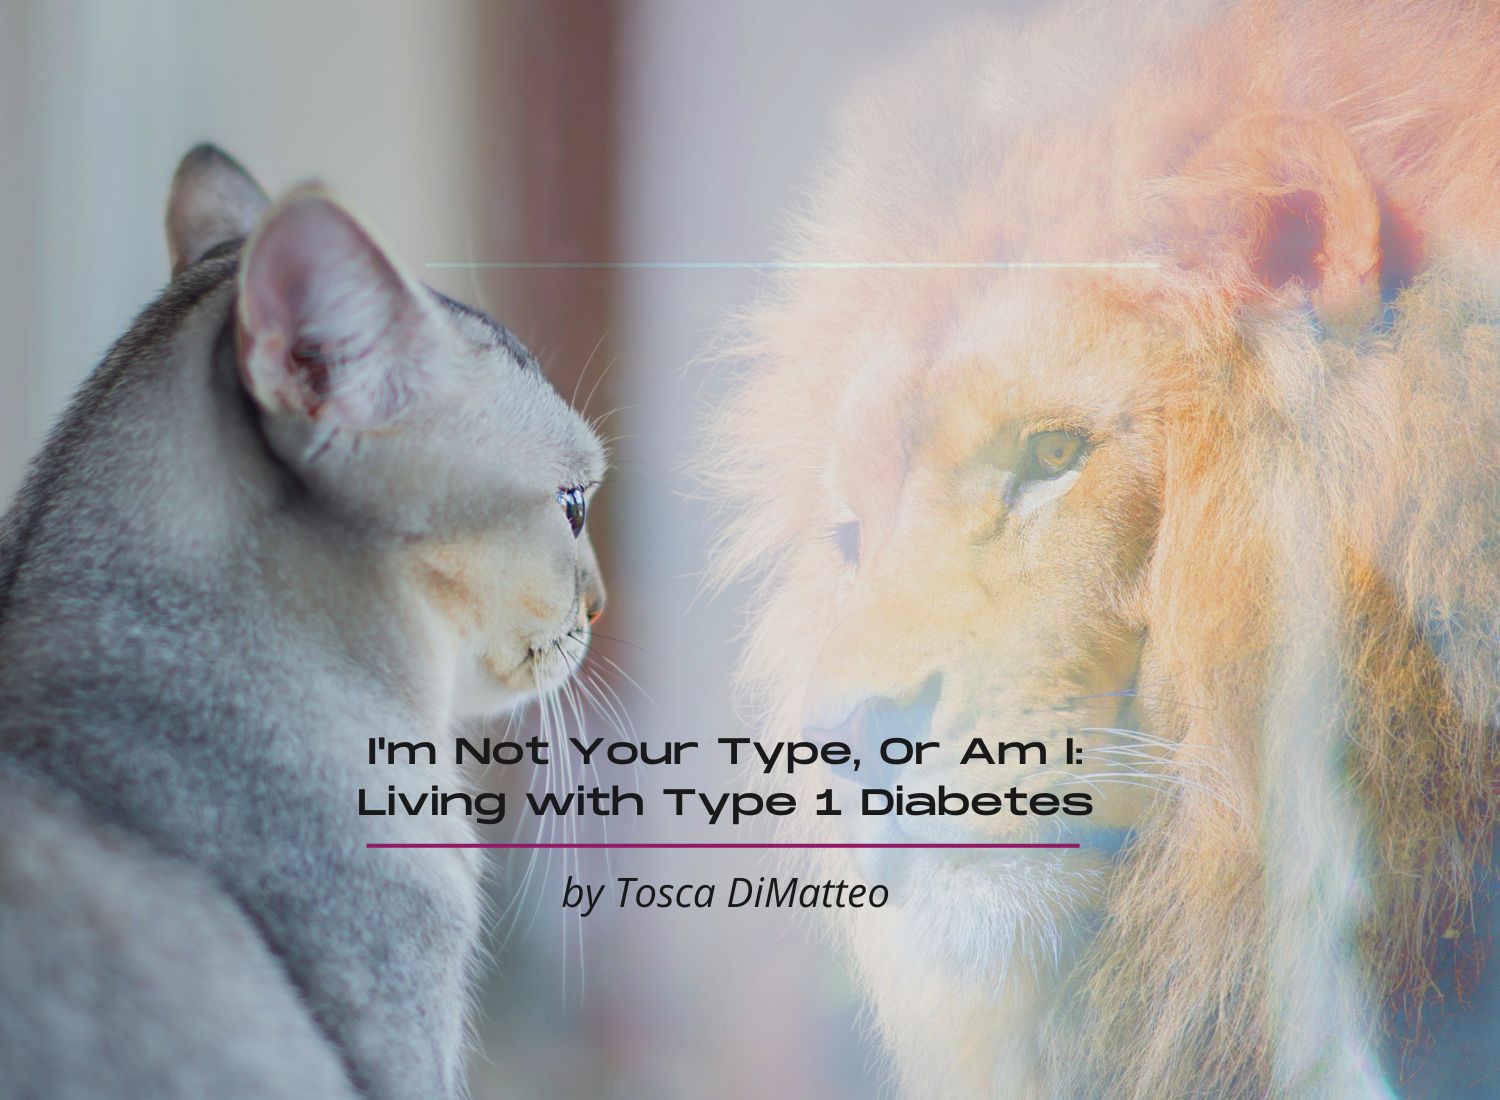 I’m Not Your Type, Or Am I: Living With Type 1 Diabetes